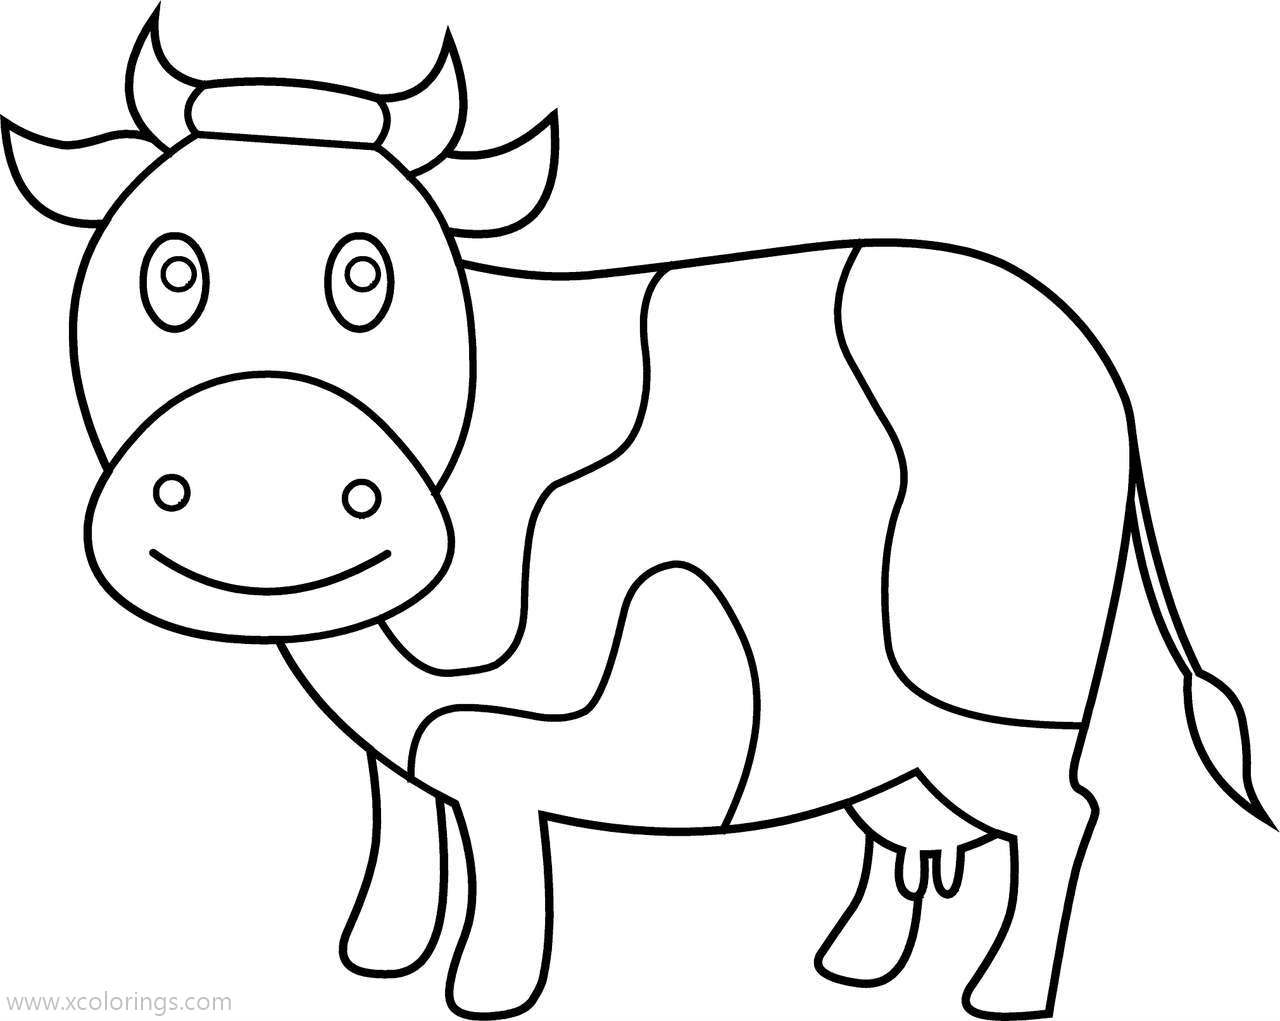 Free Black and White Cow Coloring Pages printable